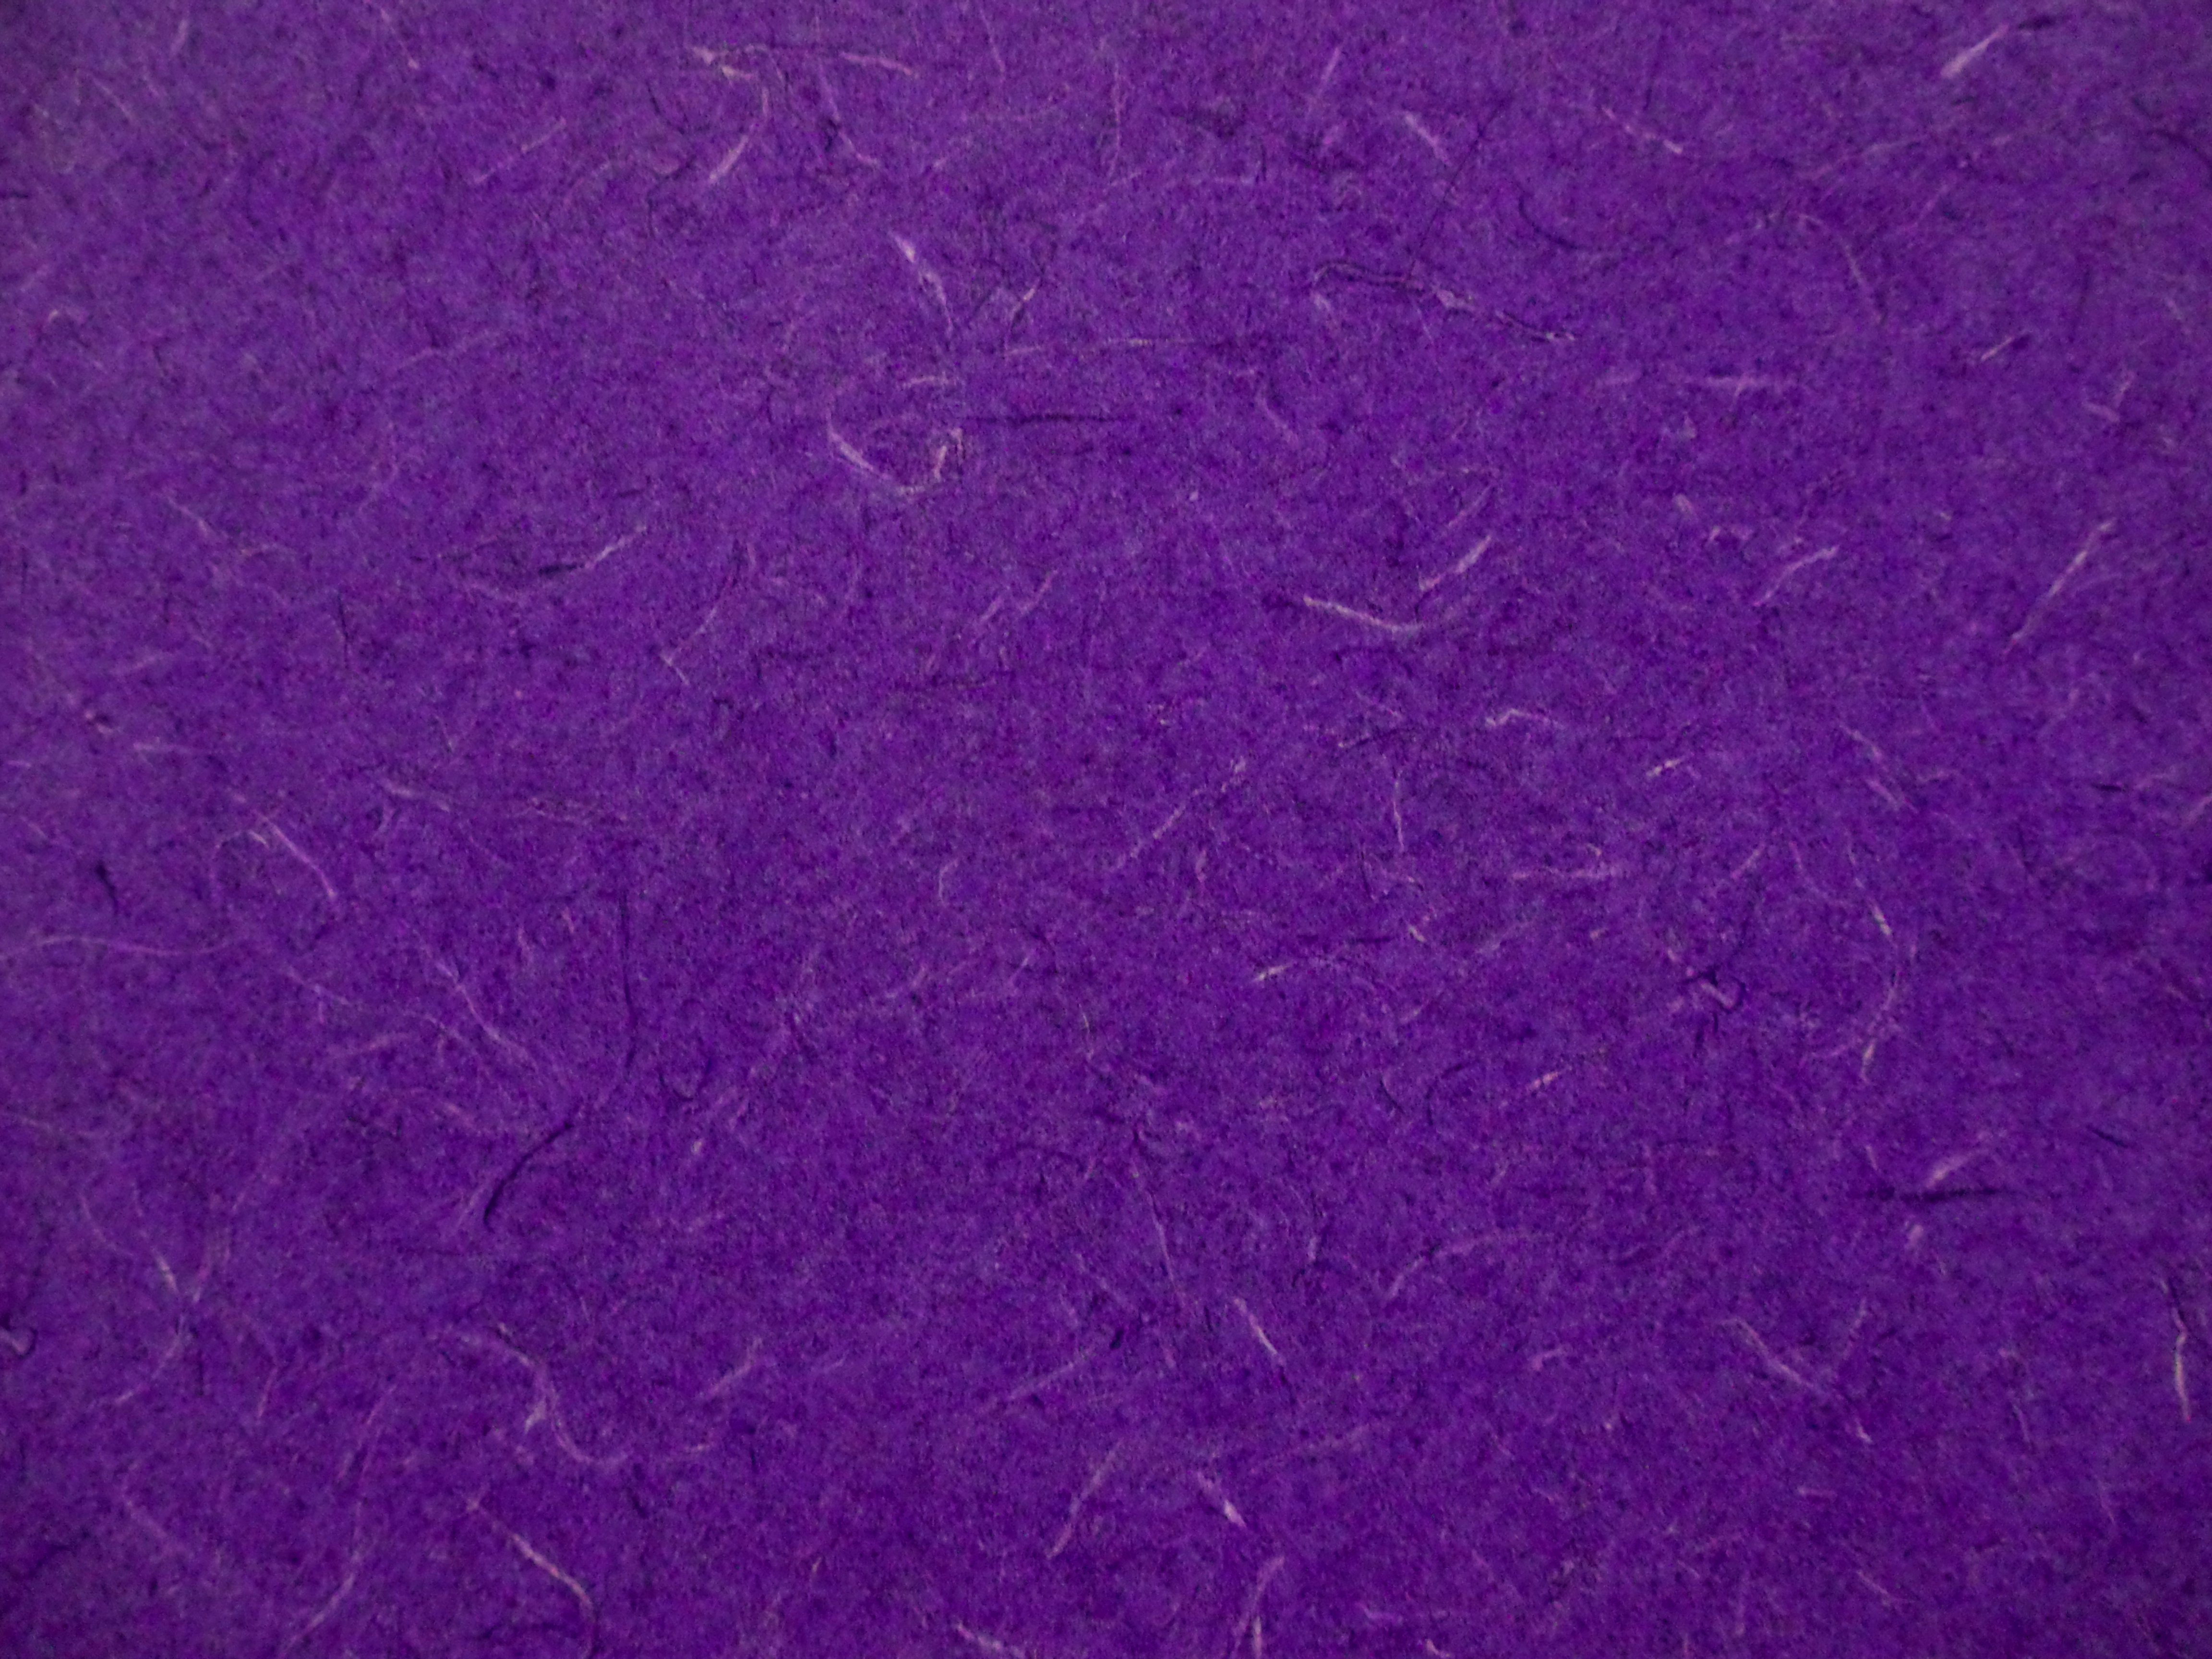 Purple Abstract Pattern Laminate Countertop Texture Picture Free